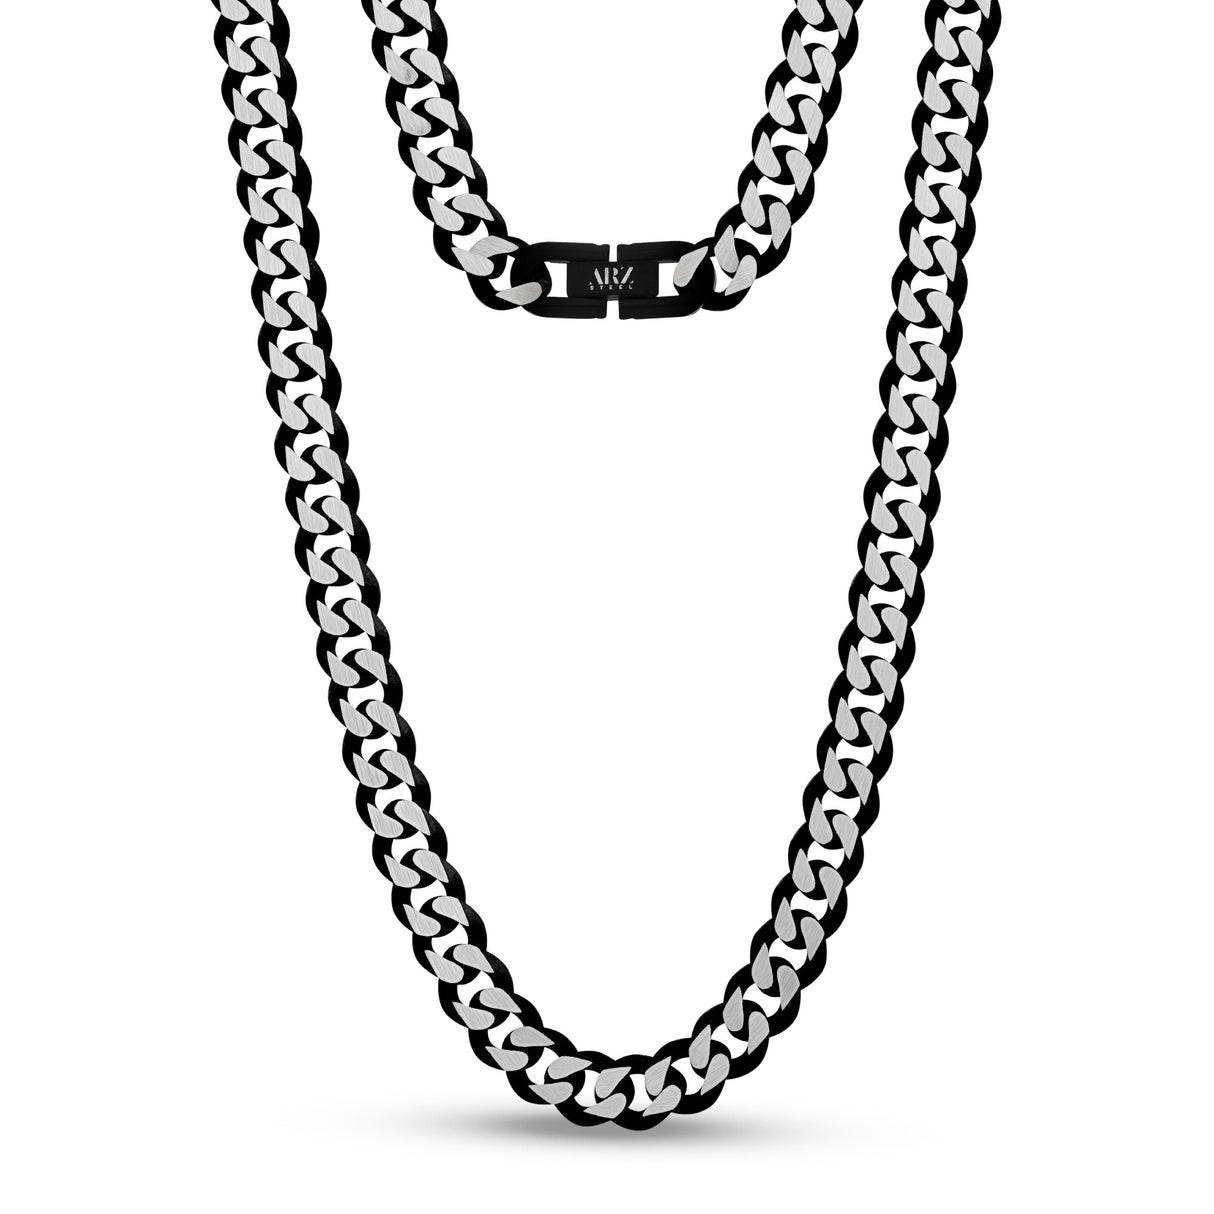 8mm Matte Black and Silver Steel Two Tone Cuban Link Chain